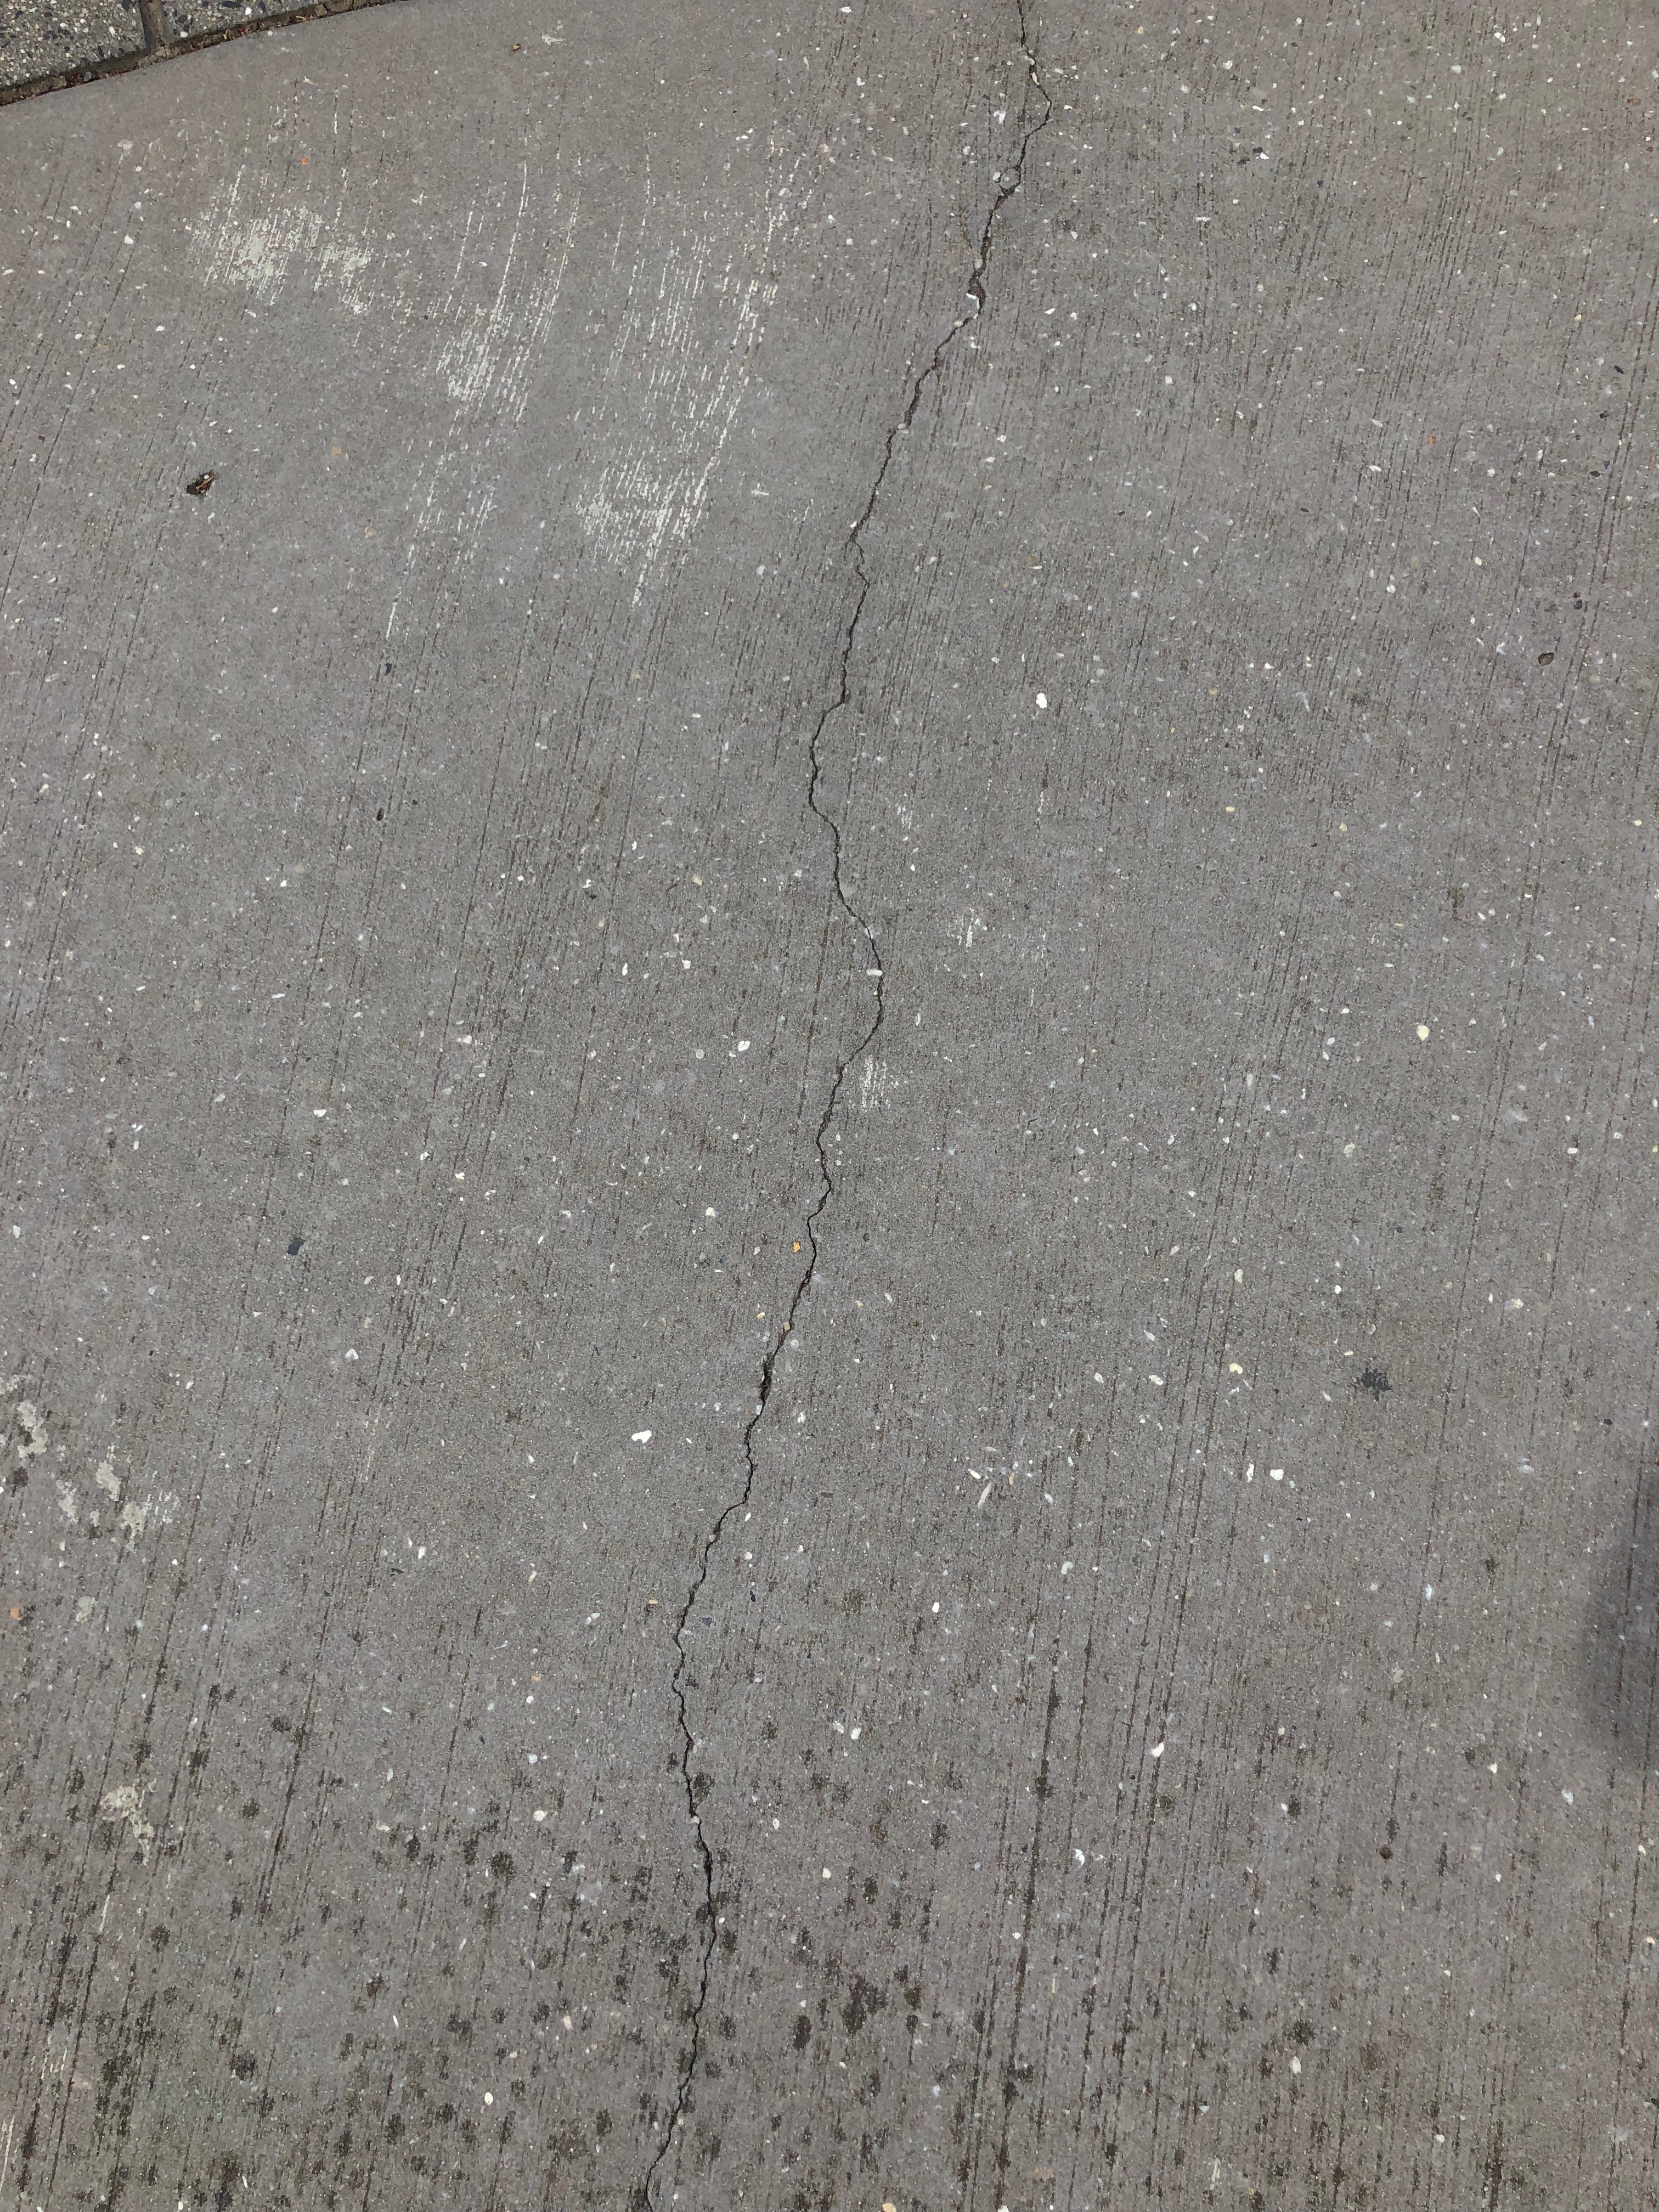 Why do you get cracks in epoxy floors?